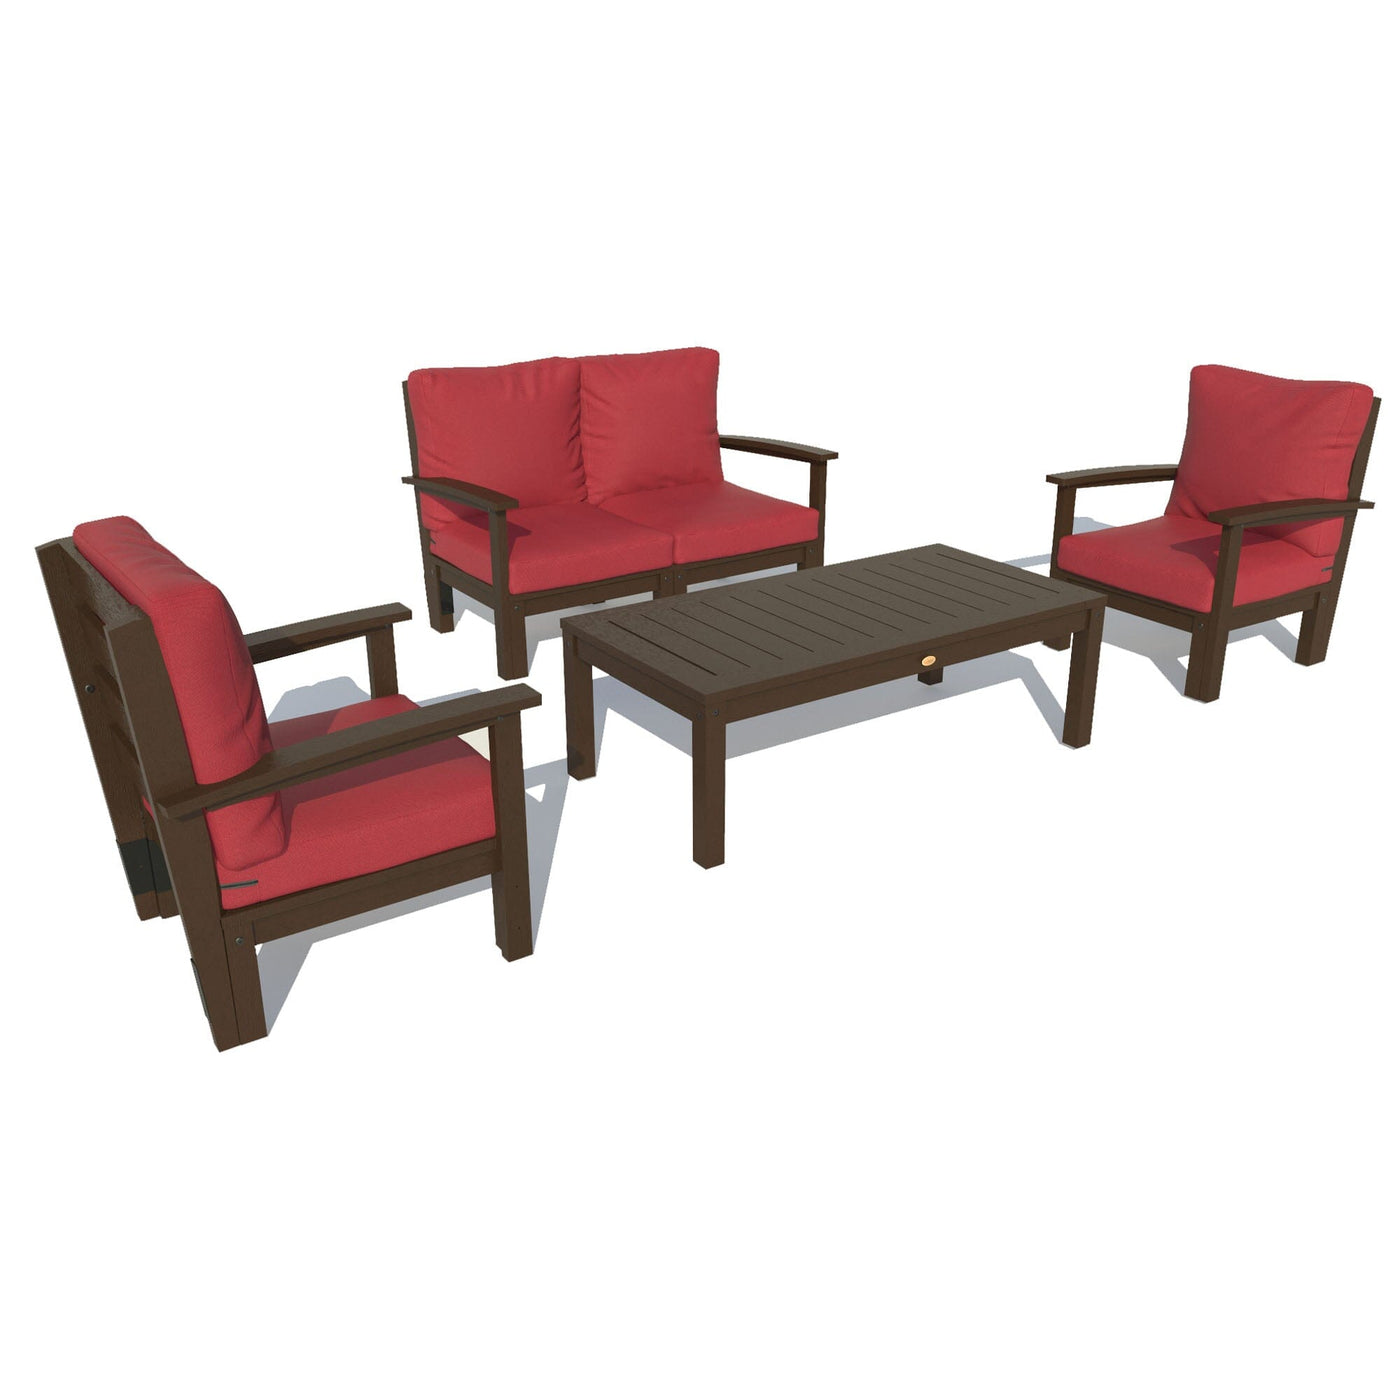 Bespoke Deep Seating: Loveseat, 2 Chair Set, and Conversation Table Deep Seating Highwood USA Firecracker Red Weathered Acorn 